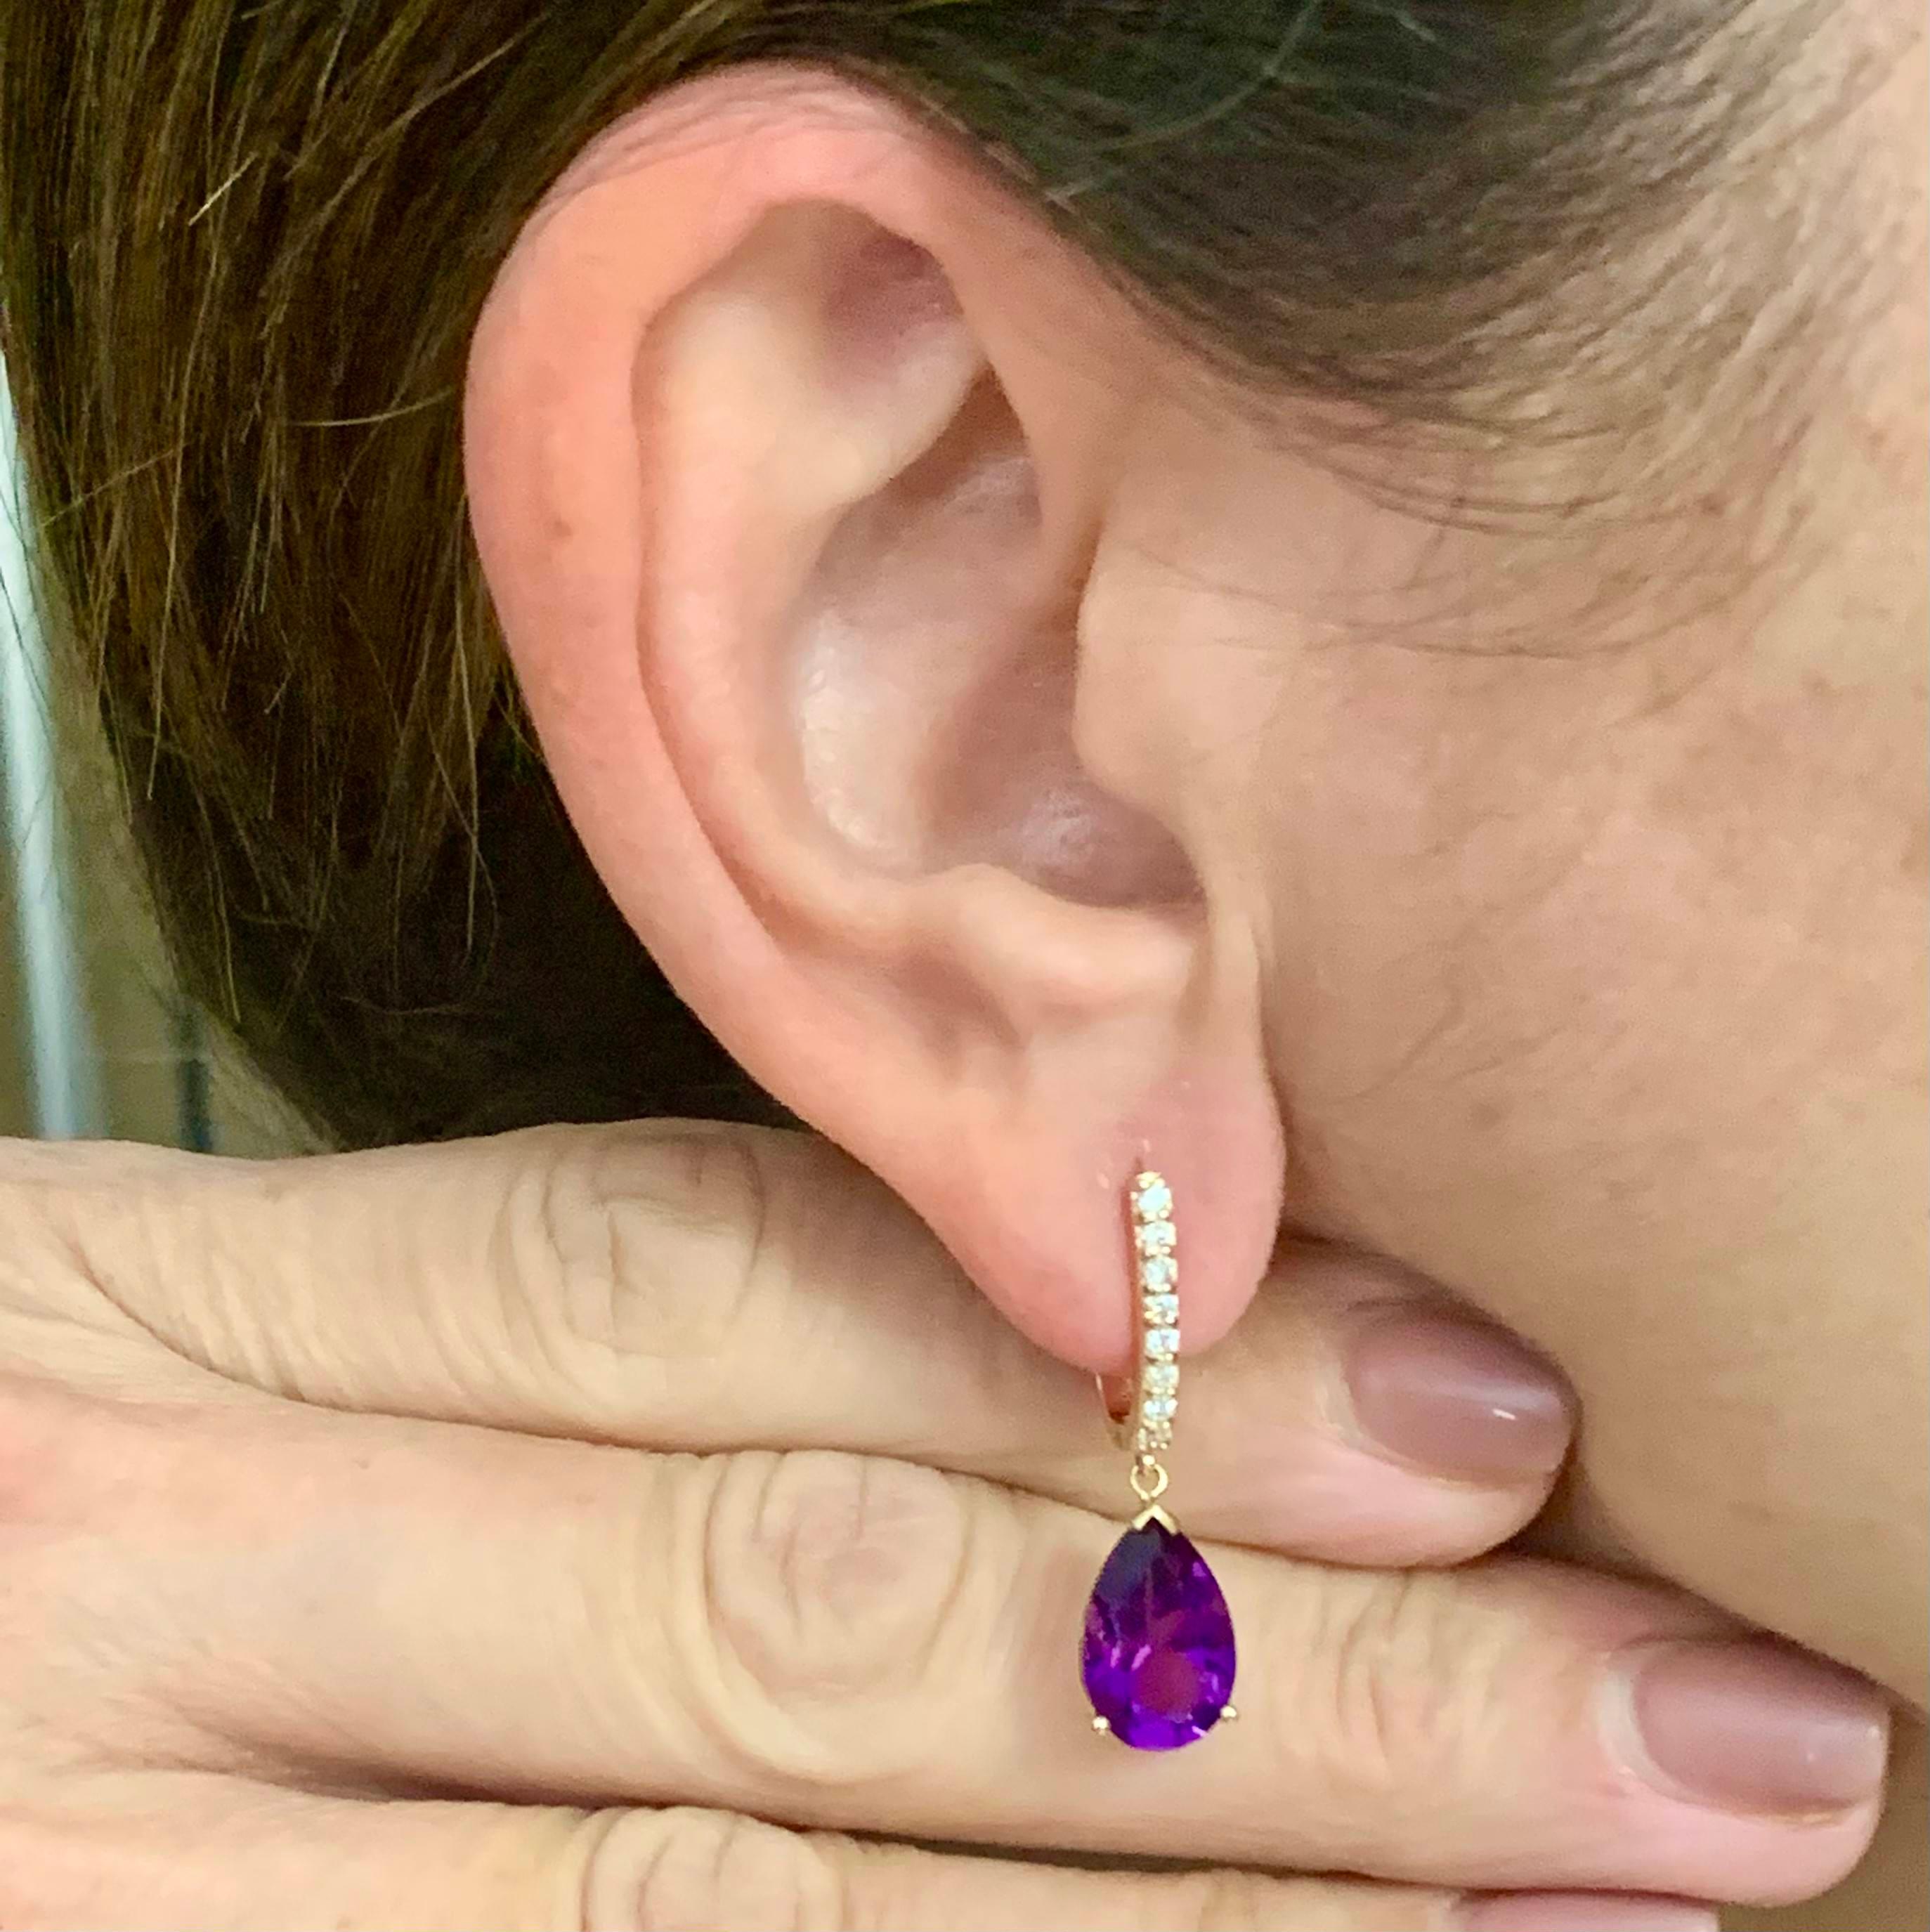 Natural Finely Faceted Quality Amethyst Diamond Earrings 14k Gold 6 TCW Certified $3,090 113446

Please look at the video attached for this item. With the video you can see the movement of the item and appreciate the faceting and details